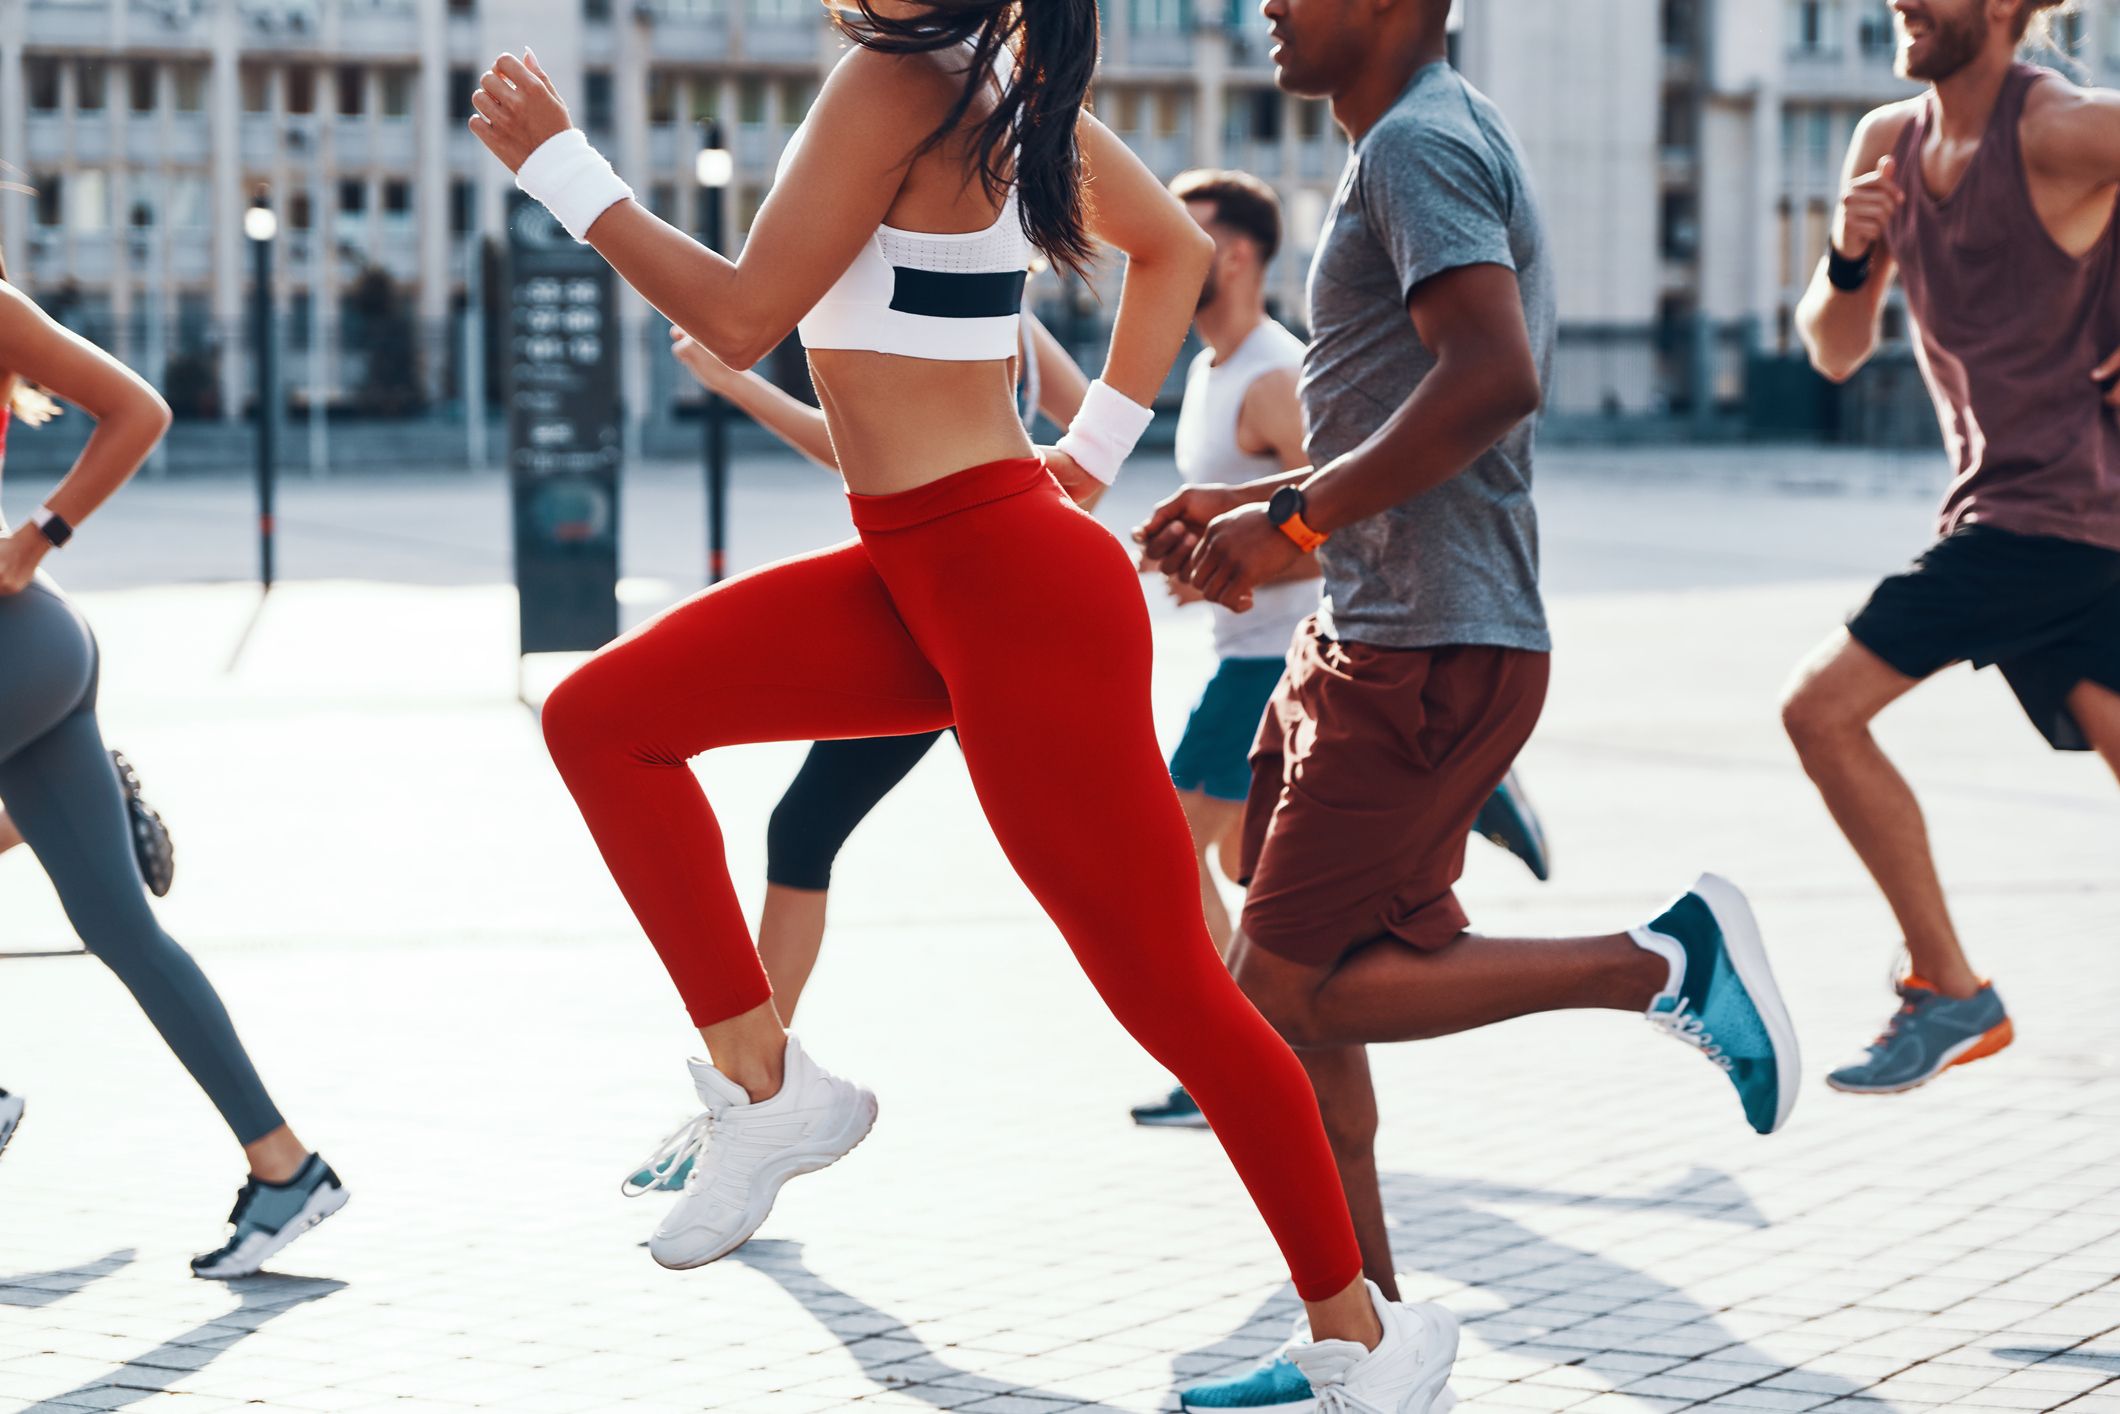 The 4 best workouts for beginner runners - Canadian Running Magazine